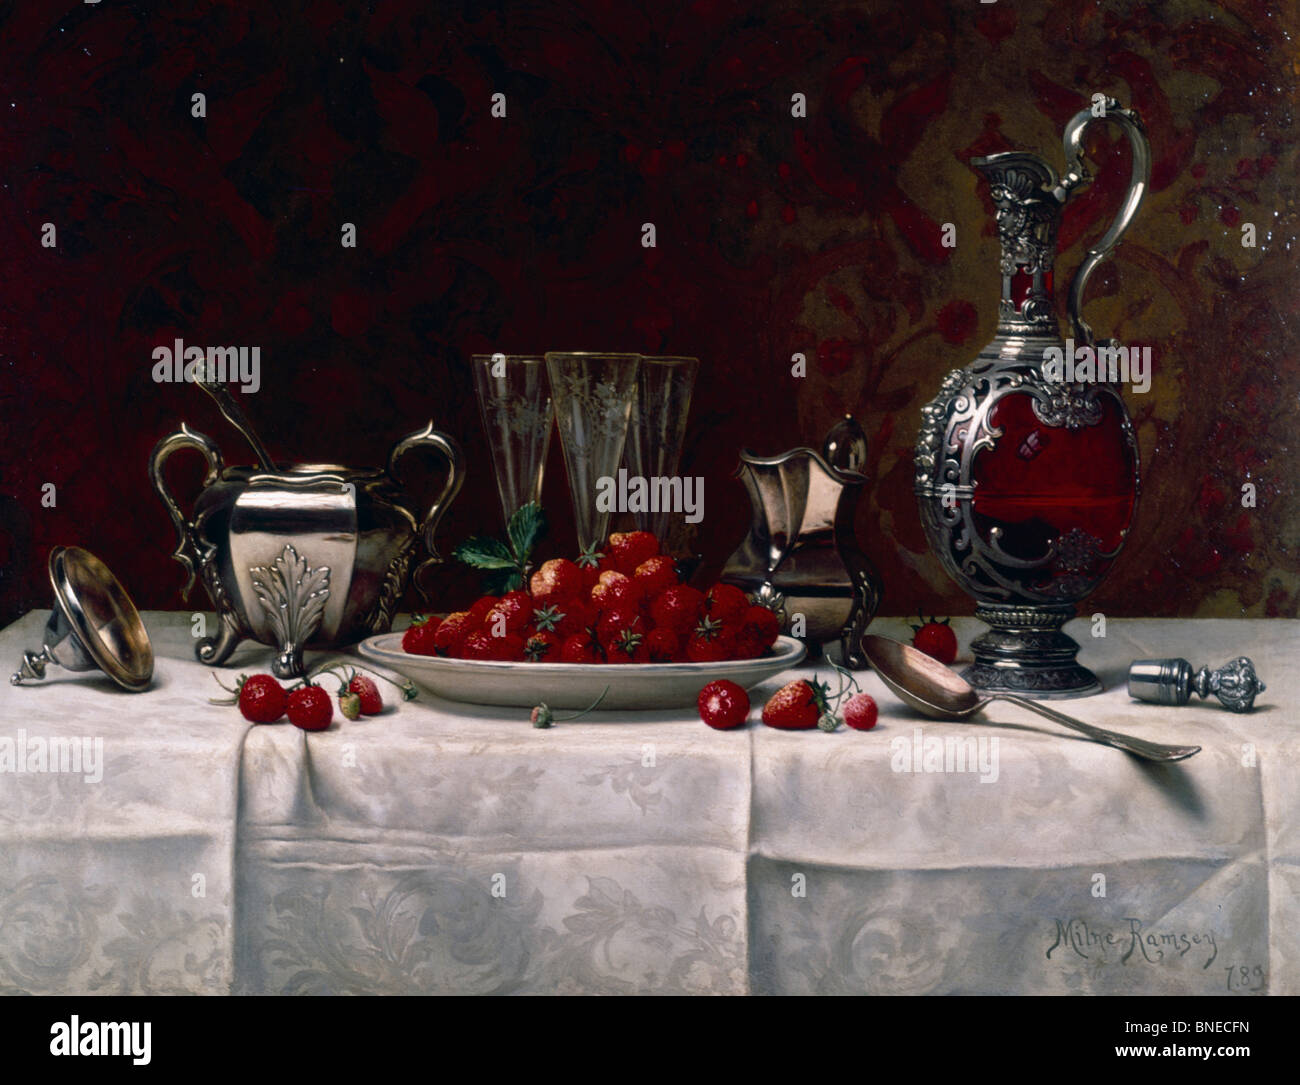 Still Life with Berries and Silver Tableware by Milne Ramsey, 1889, (1847-1915) Stock Photo